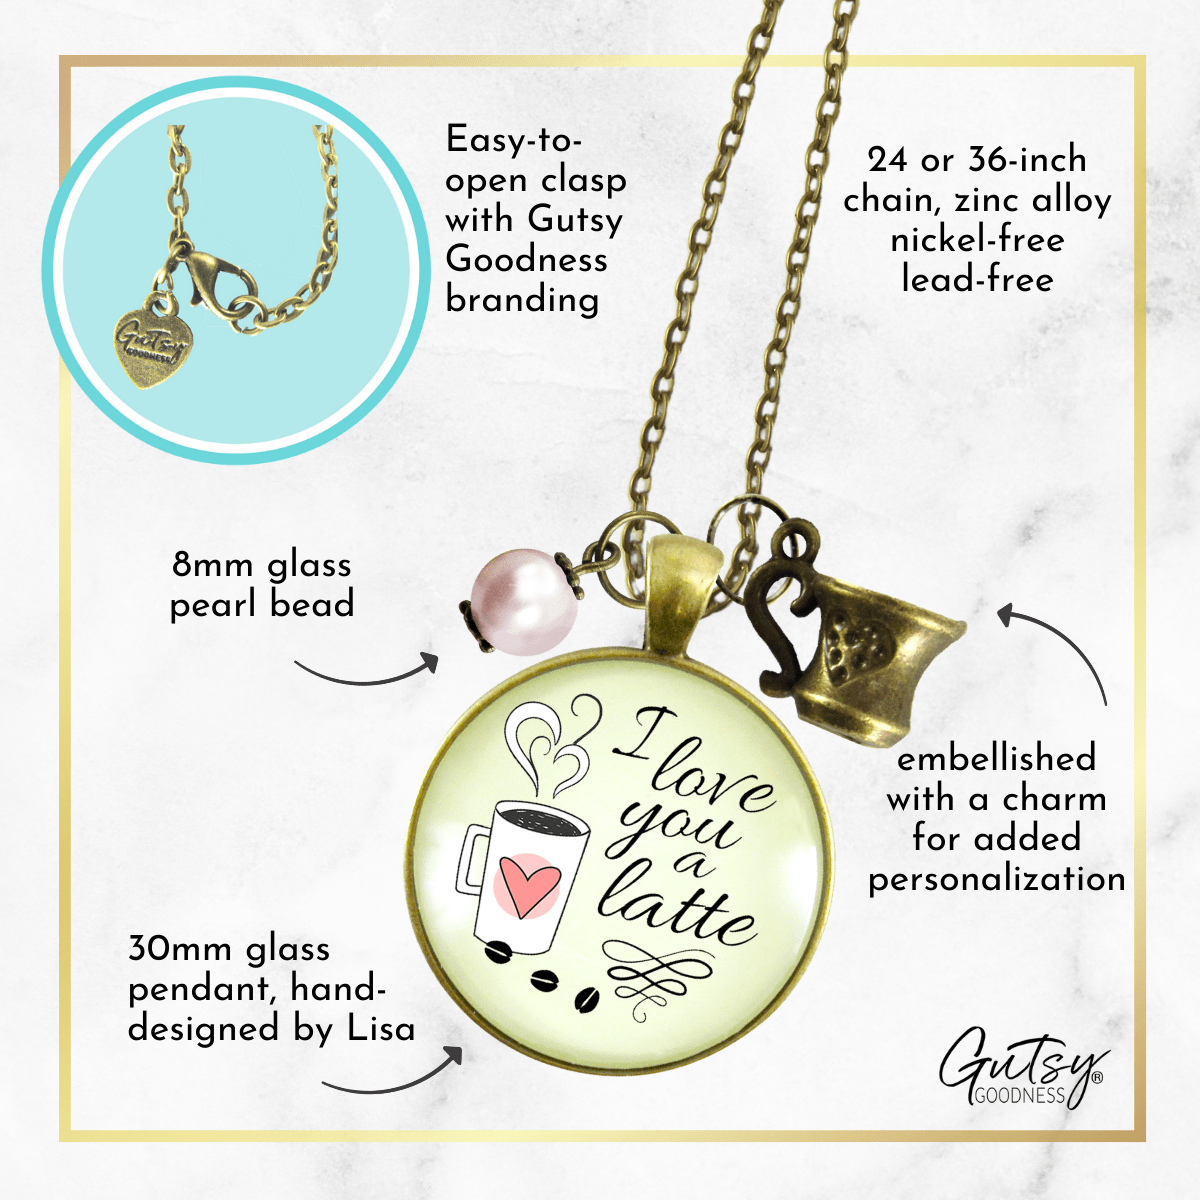 Gutsy Goodness Coffee Necklace Love You Latte Romantic Quote Caffeine Jewelry Gift - Gutsy Goodness;Coffee Necklace Love You Latte Romantic Quote Caffeine Jewelry Gift - Gutsy Goodness Handmade Jewelry Gifts